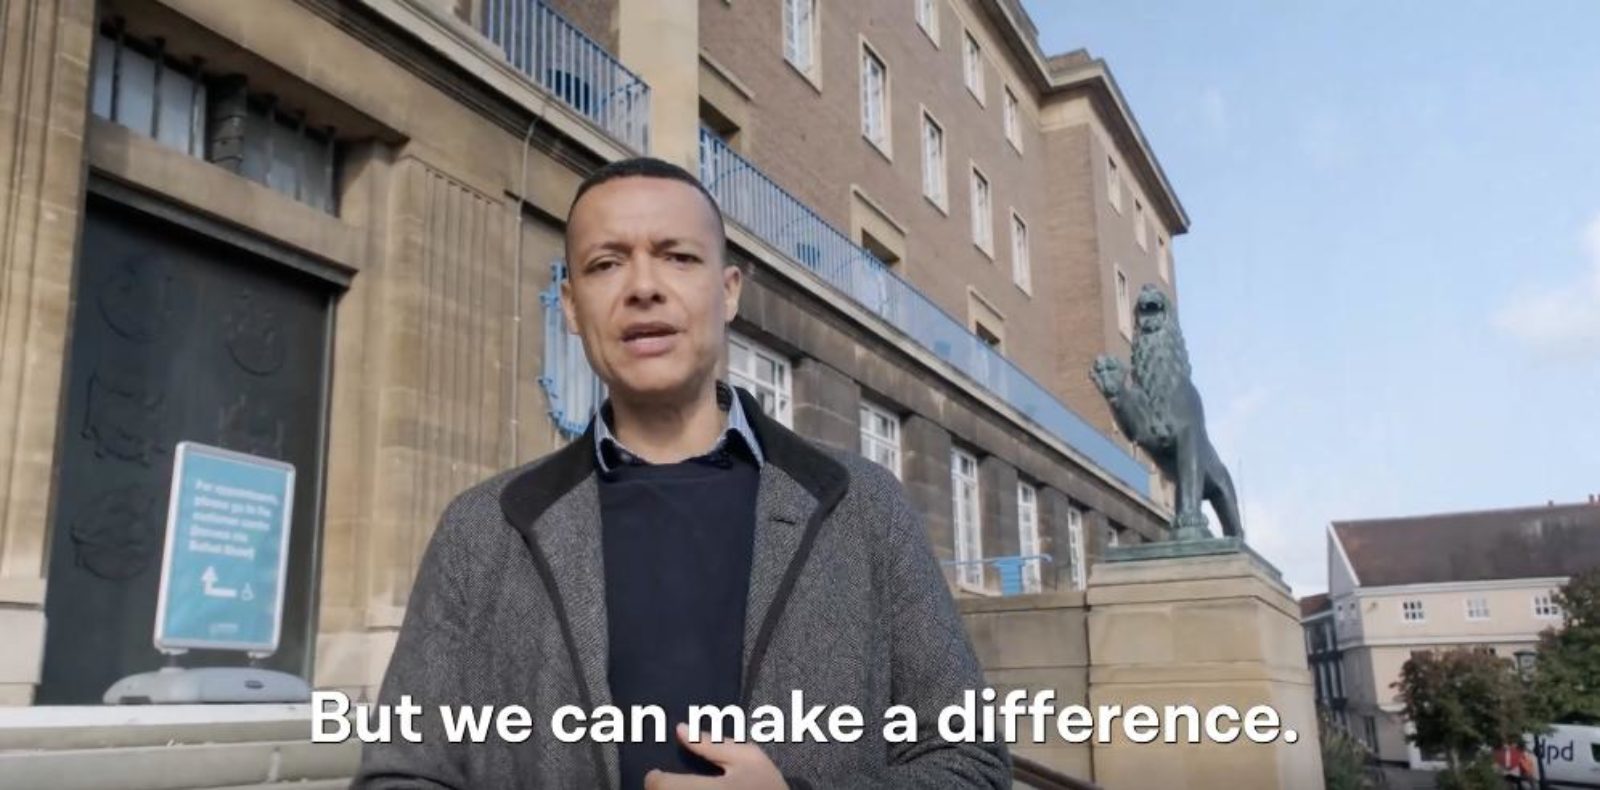 Image shows a still from a video with Clive standing in front of Norwich City Hall. The caption reads 